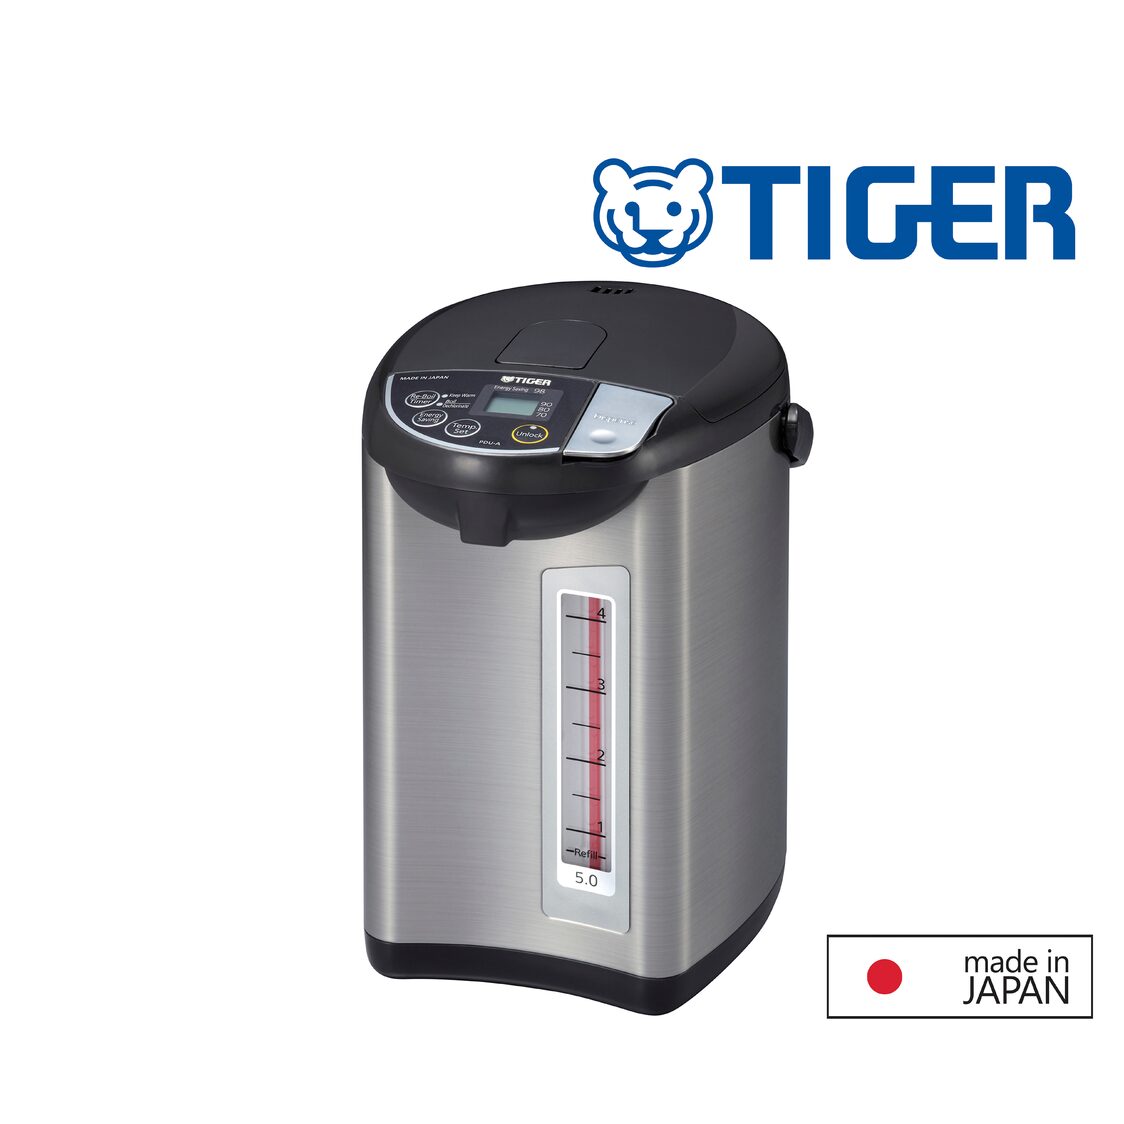 TIGER 50L Electric Water Heater Made in Japan PDU-A50S